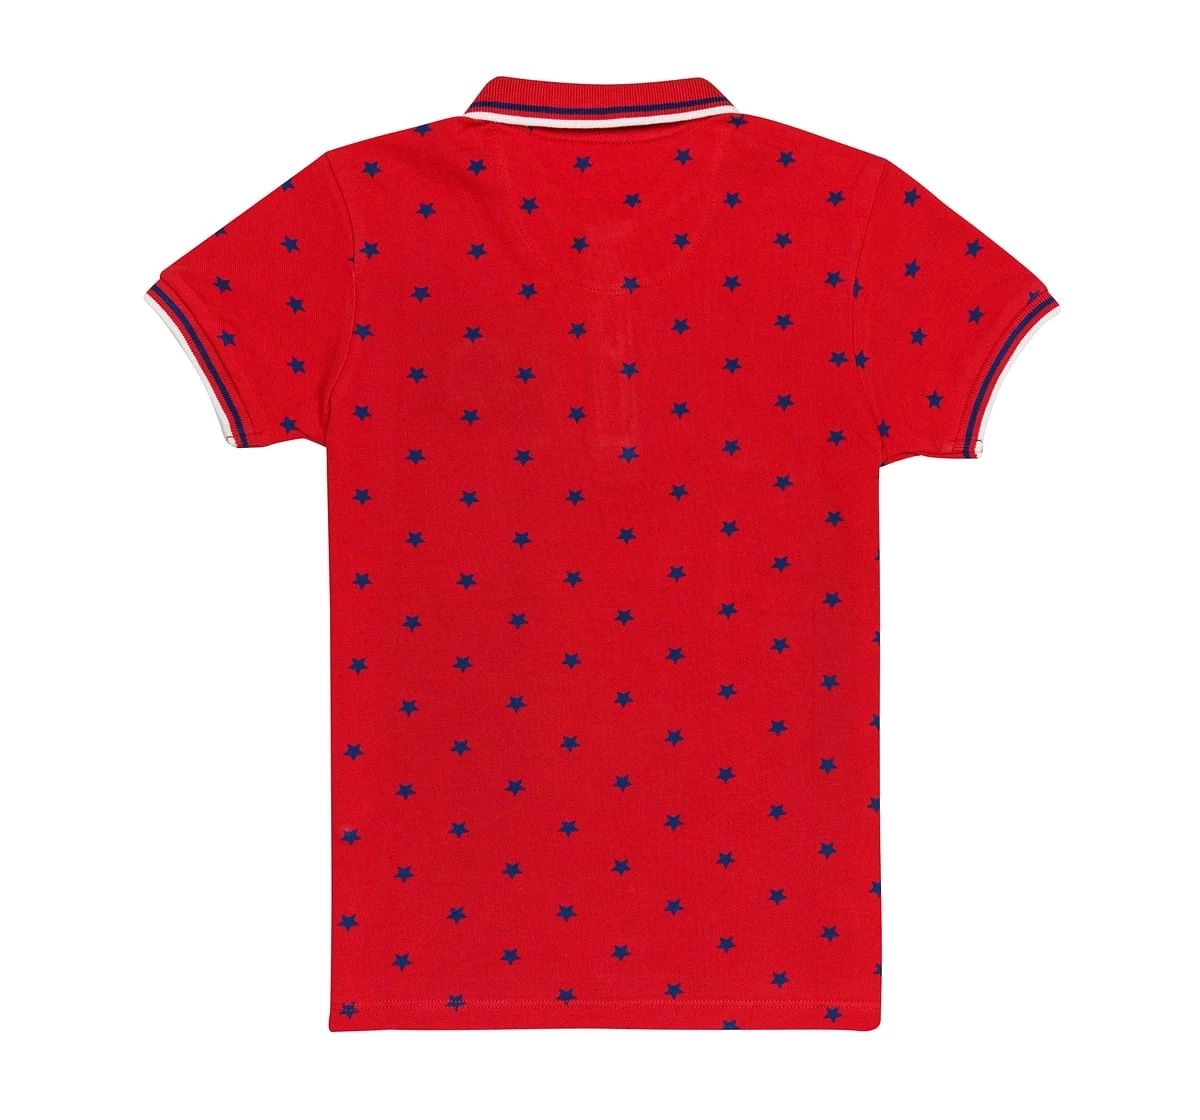 H by Hamleys Boys Short Sleeves Polo T-Shirt All Over Star Print-Red Multi